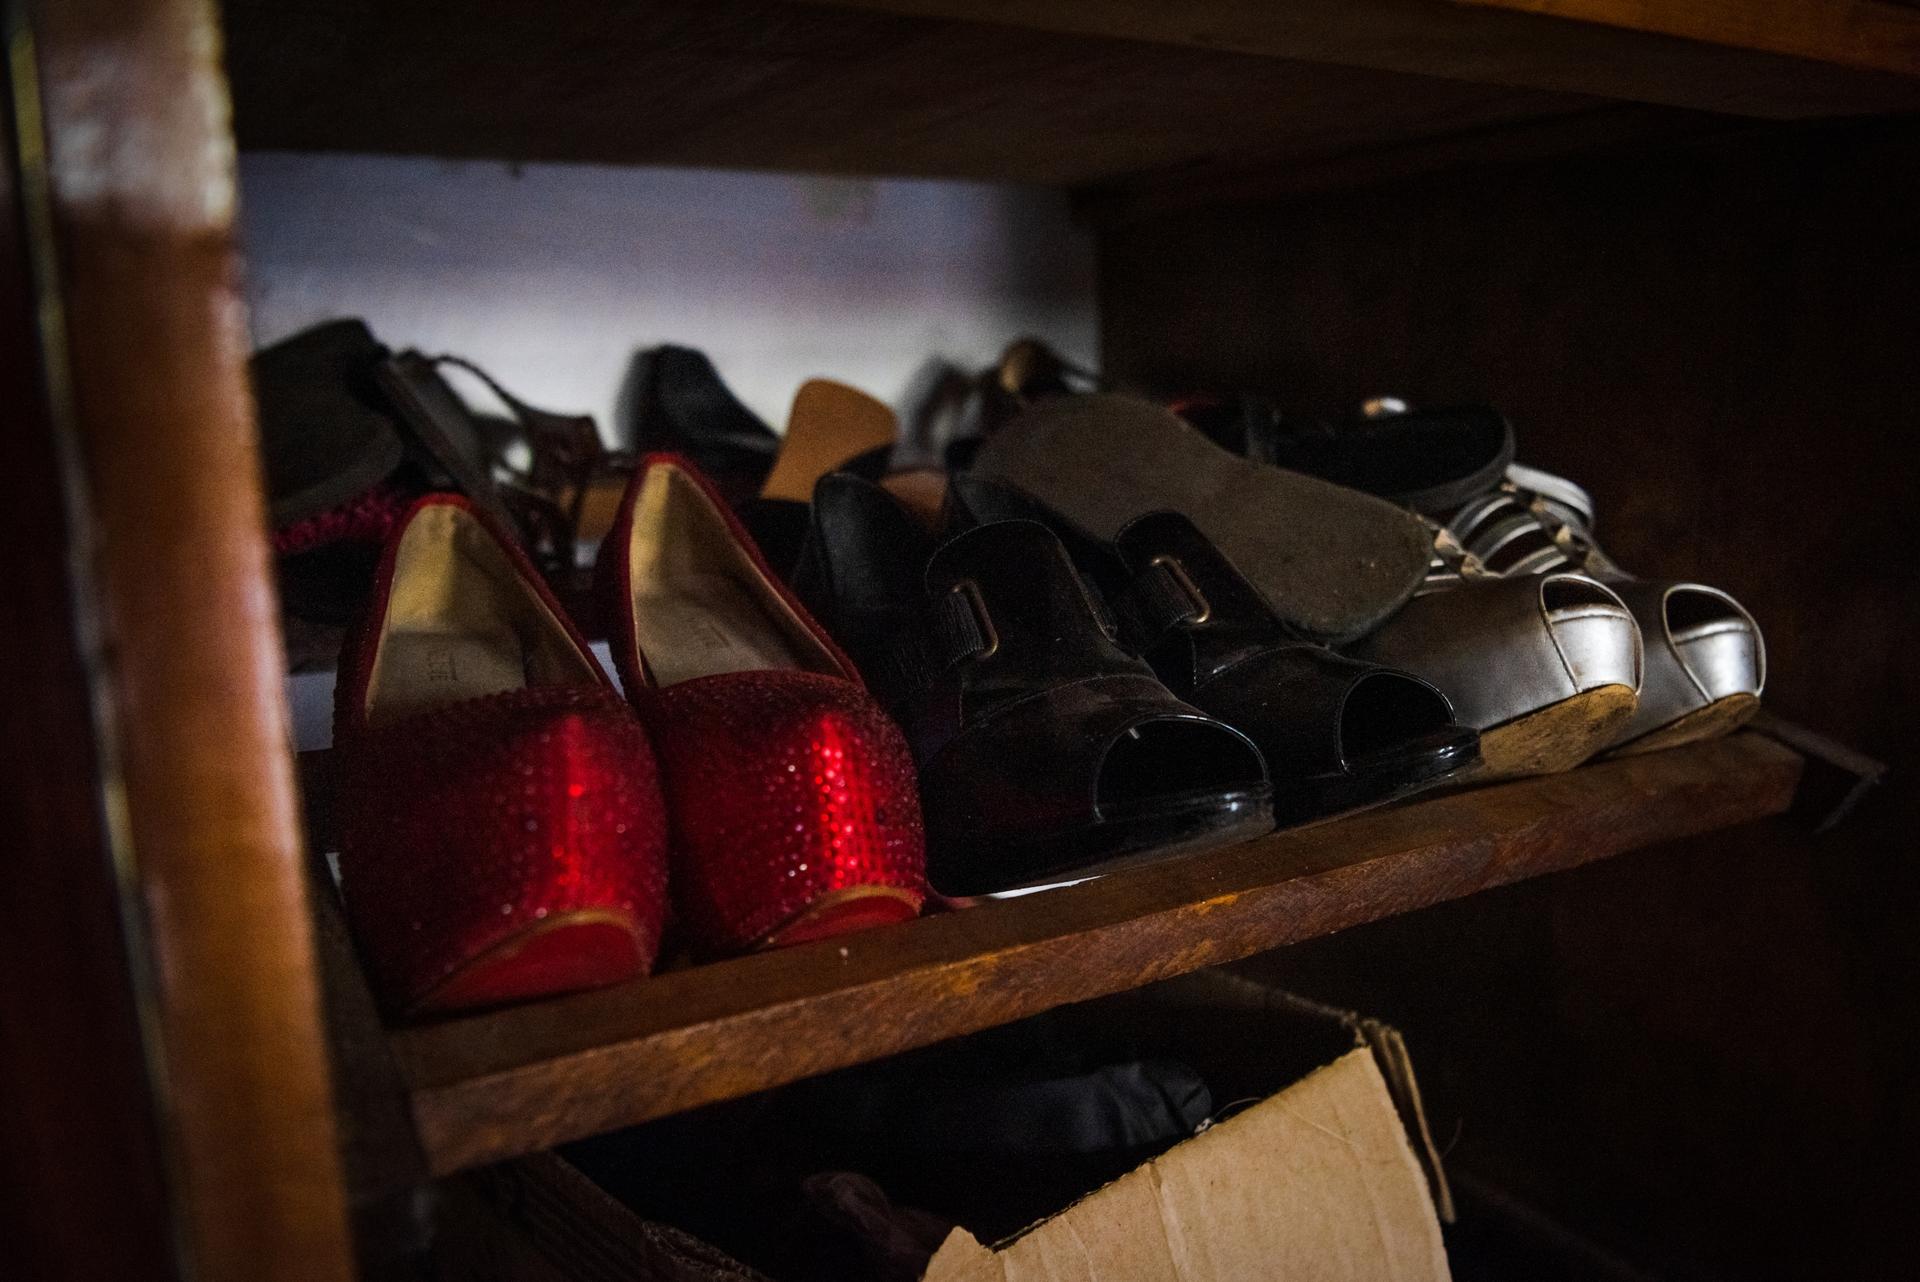 A row of high heeled shoes in red and black